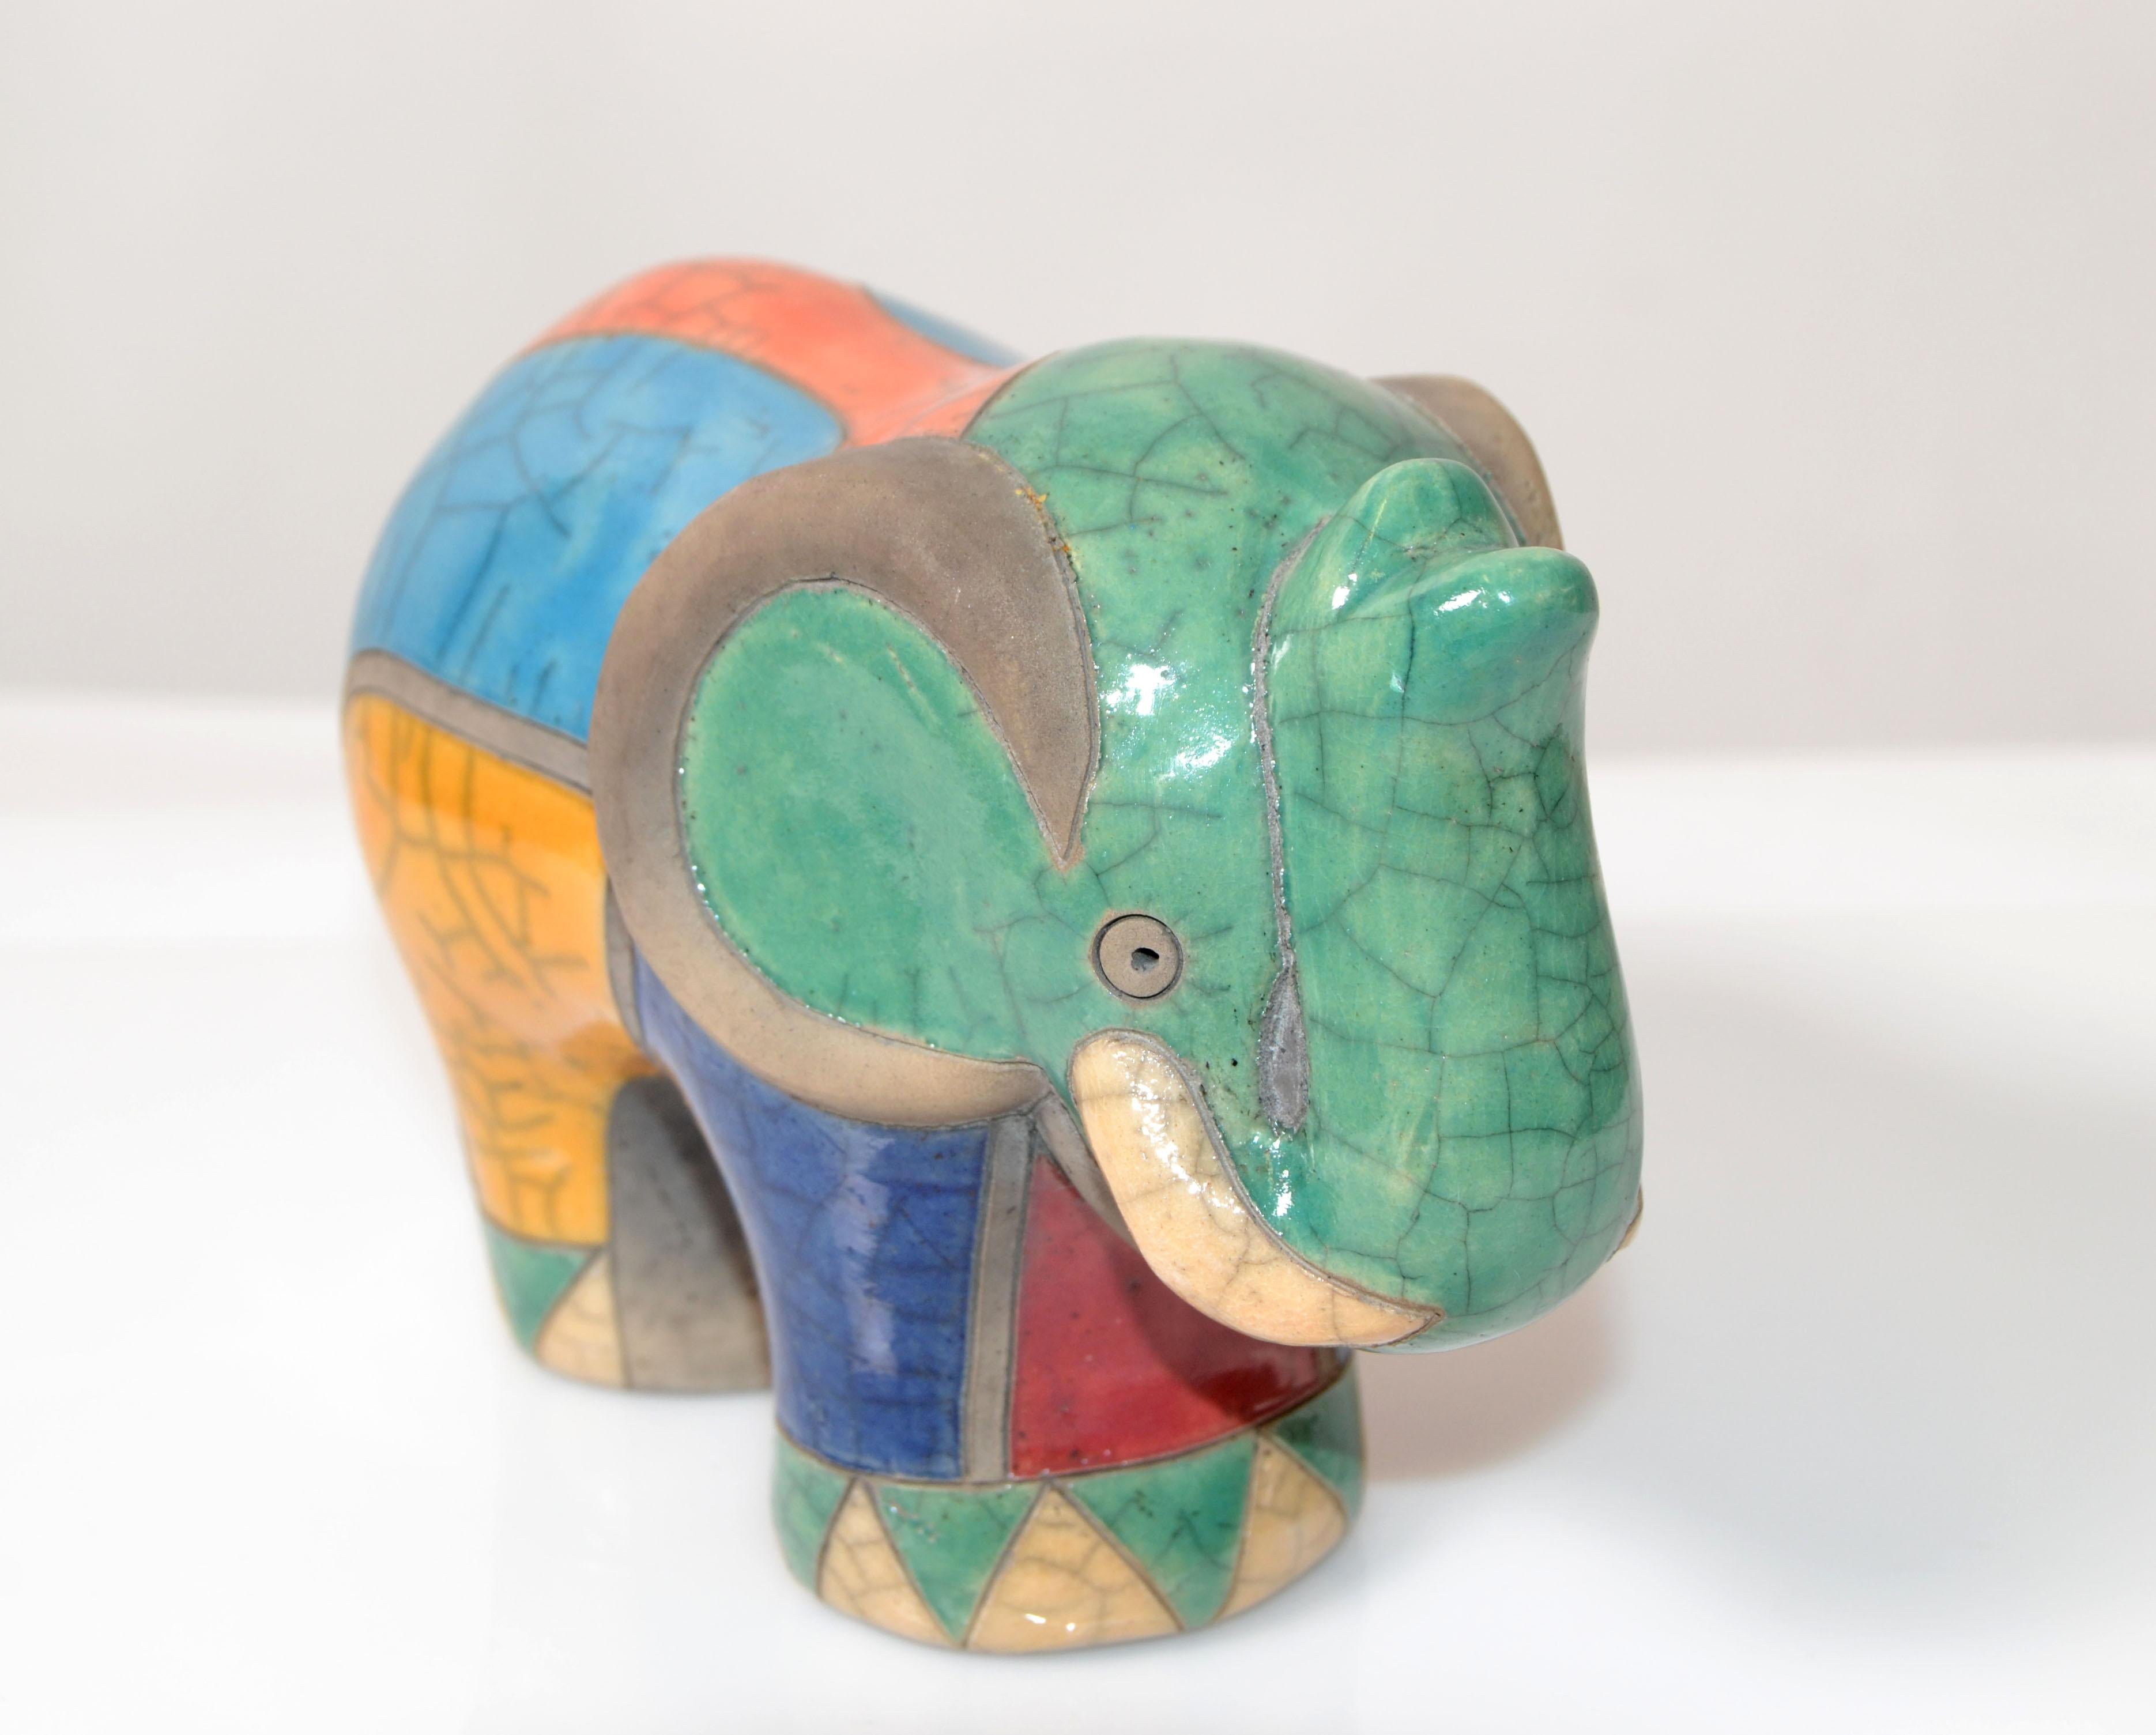 Hand-Painted Luca CL Marked Colorful Ceramic Elephant Sculpture Mid-Century Modern Italy 1970 For Sale